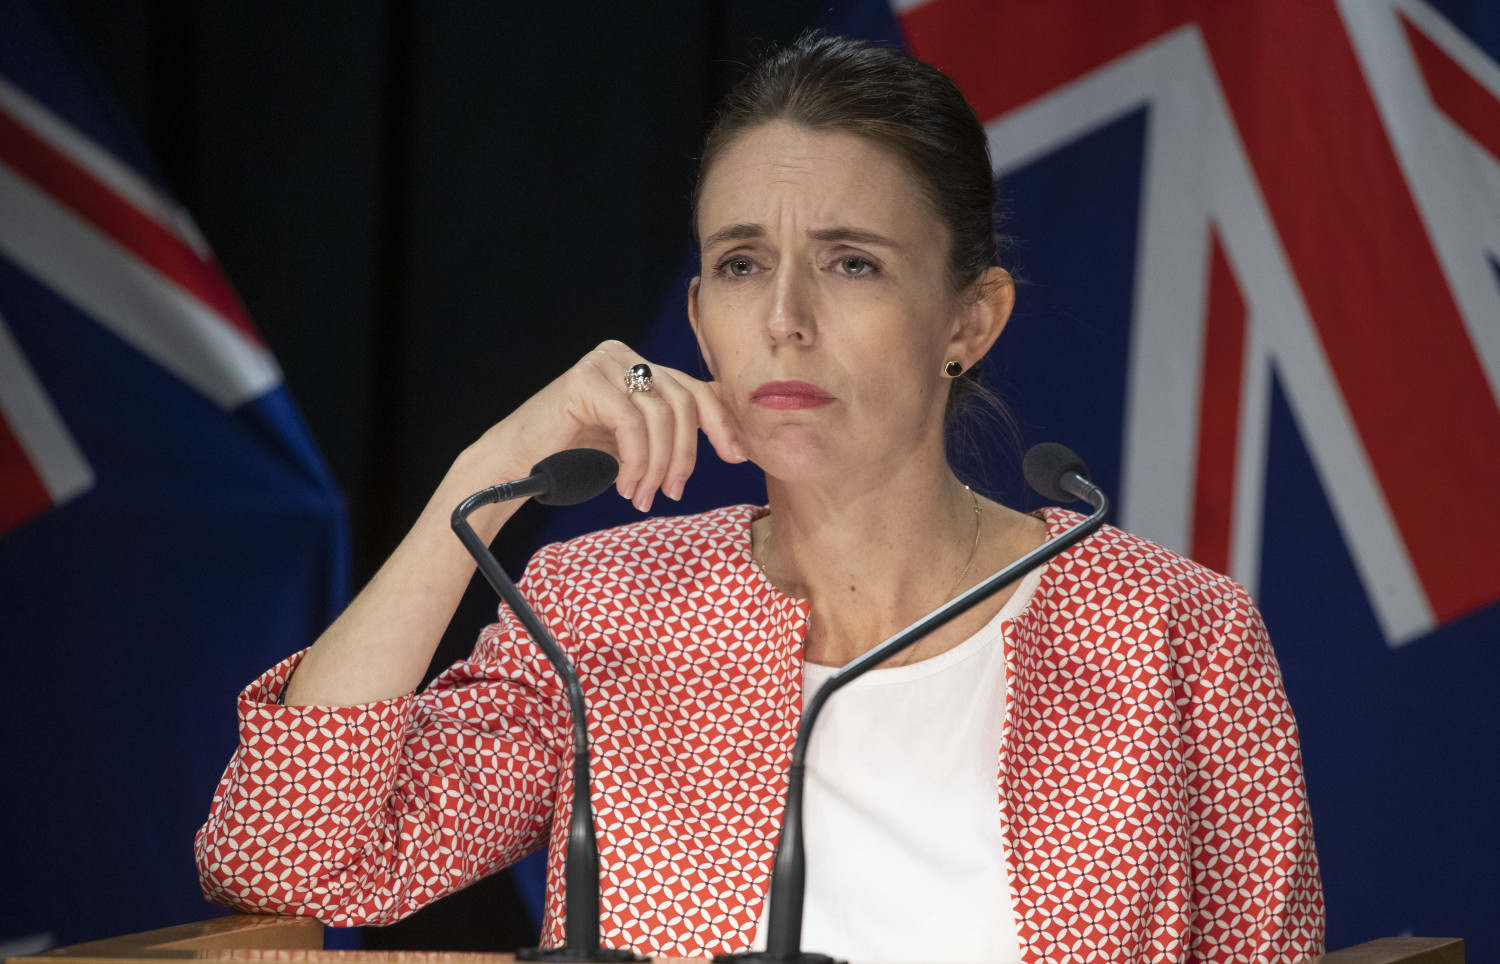 New Zealand PM Jacinda Ardern underscored her staunch opposition to an appeal by Christchurch mosque attacker Brenton Tarrant, who killed 51 people in 2019, to appeal his conviction and sentence.